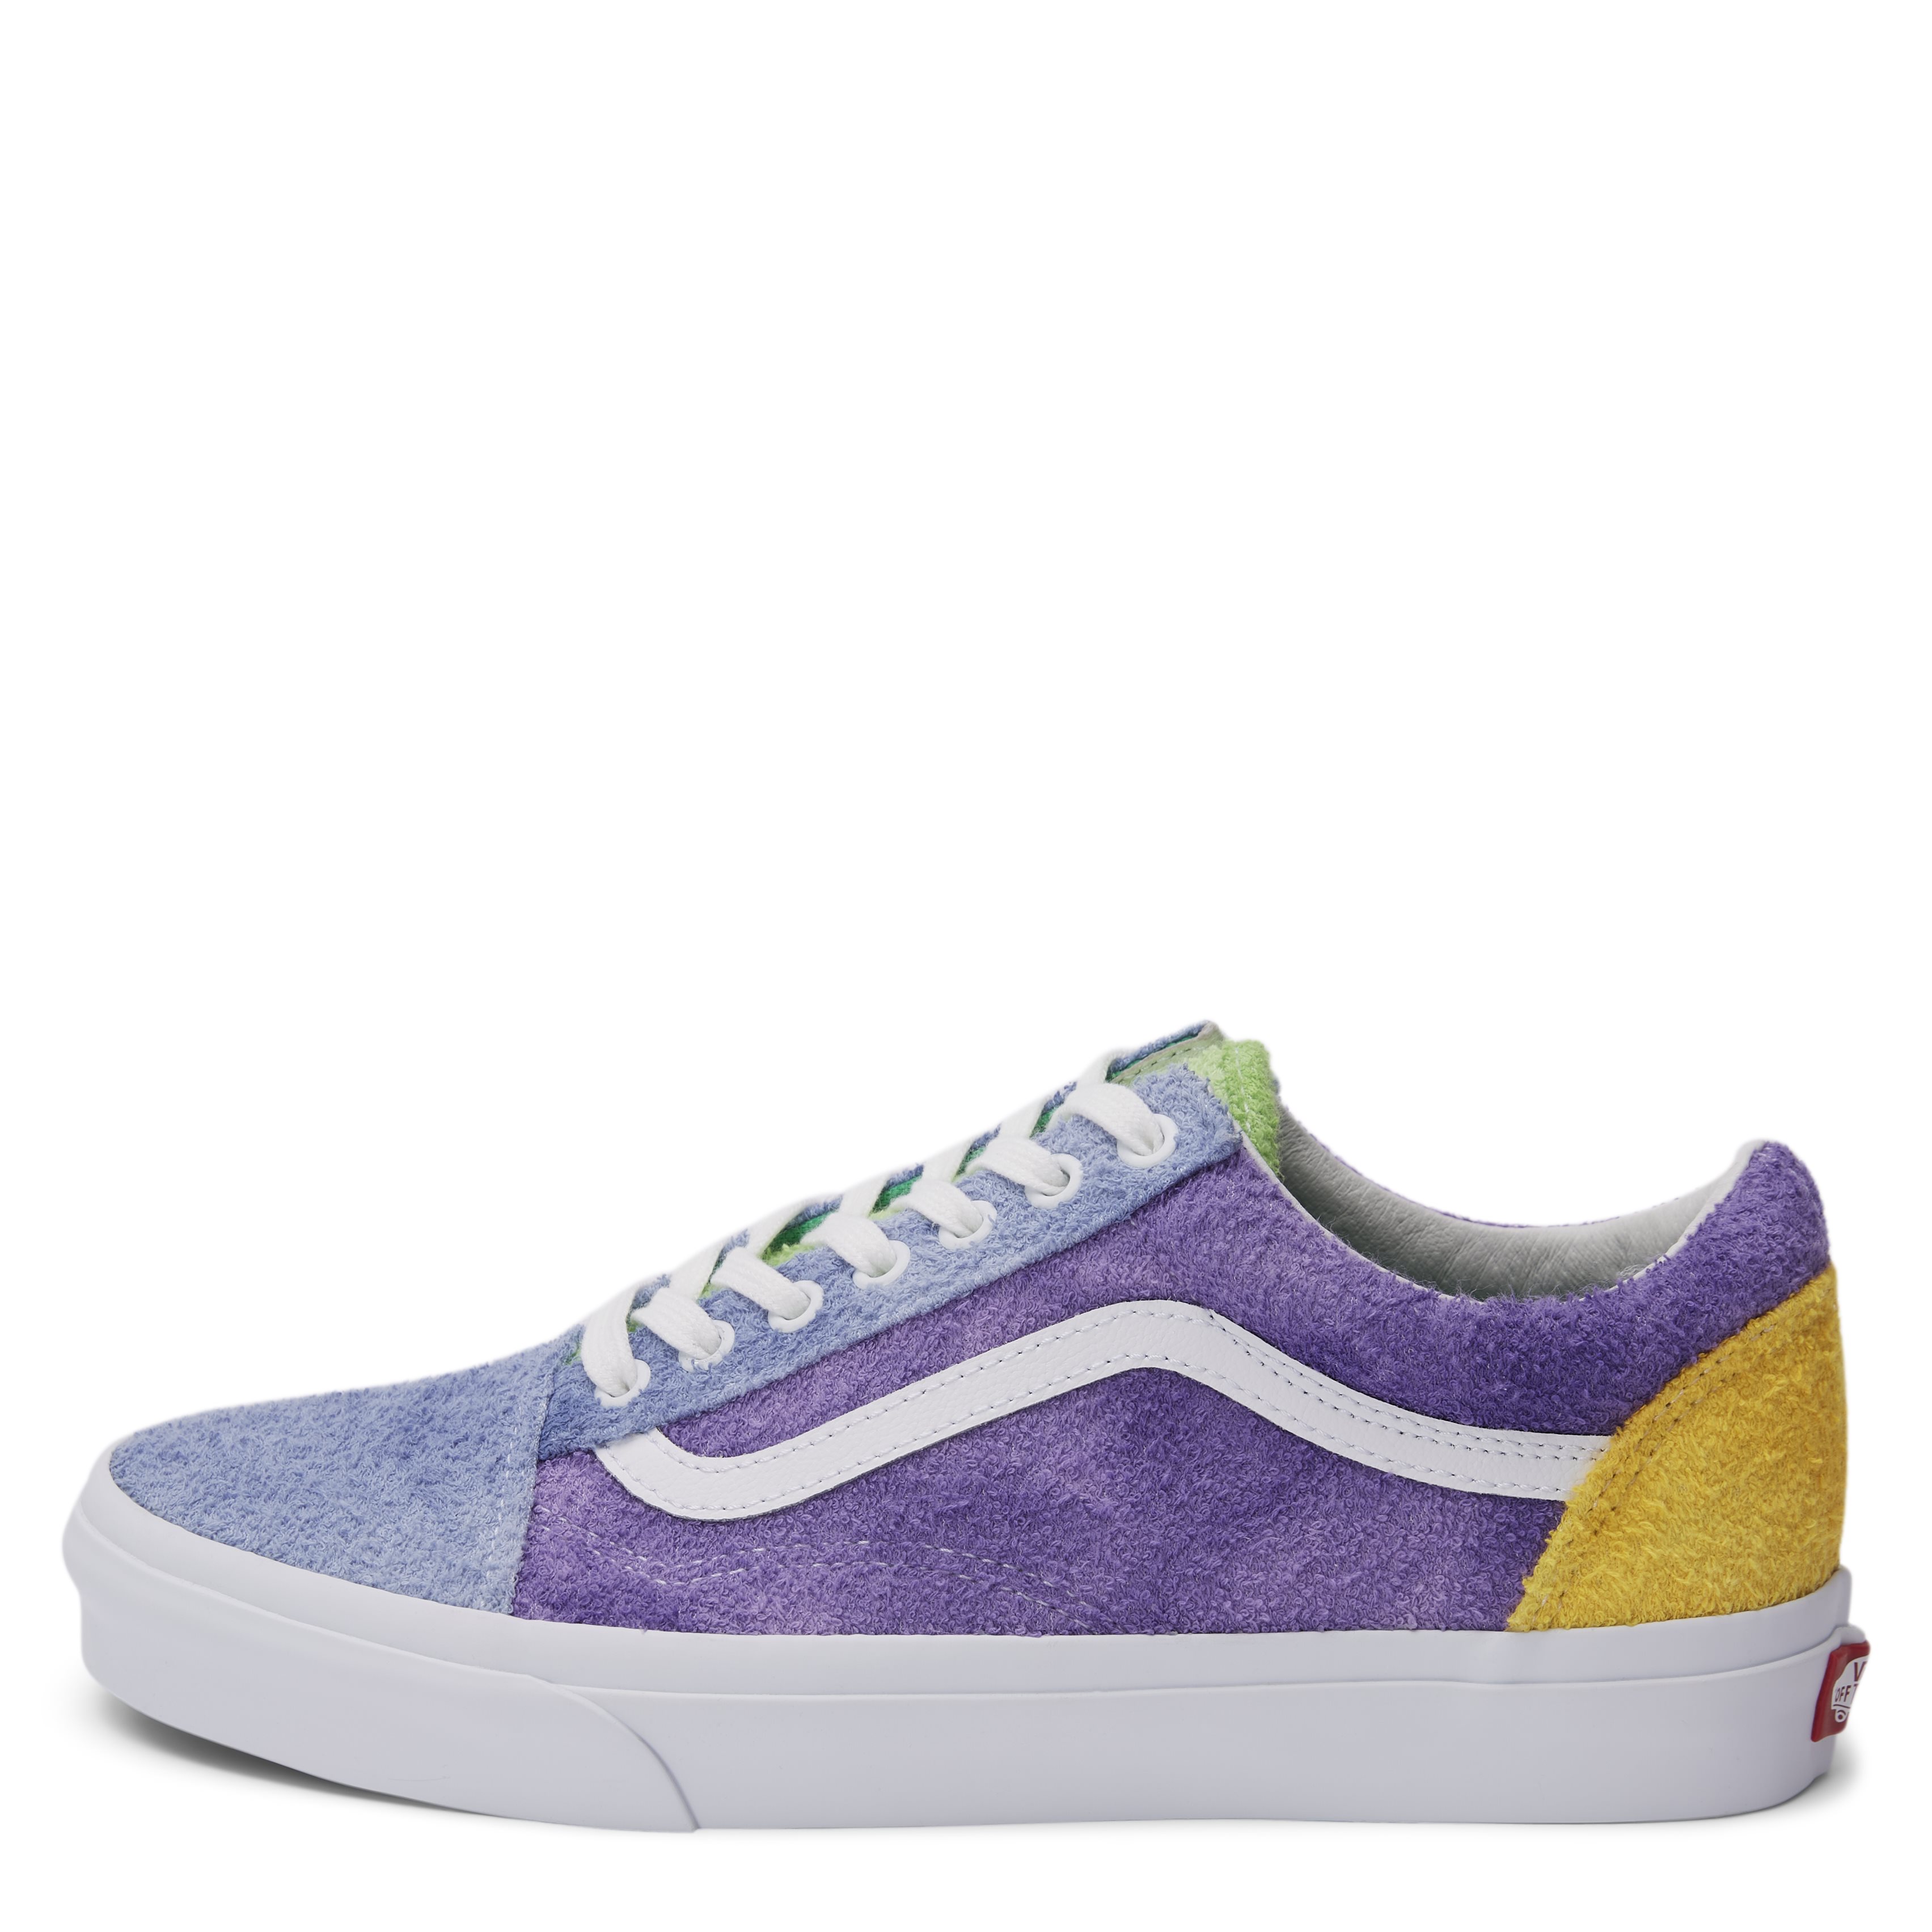 Old School Shoes - Shoes - Lilac